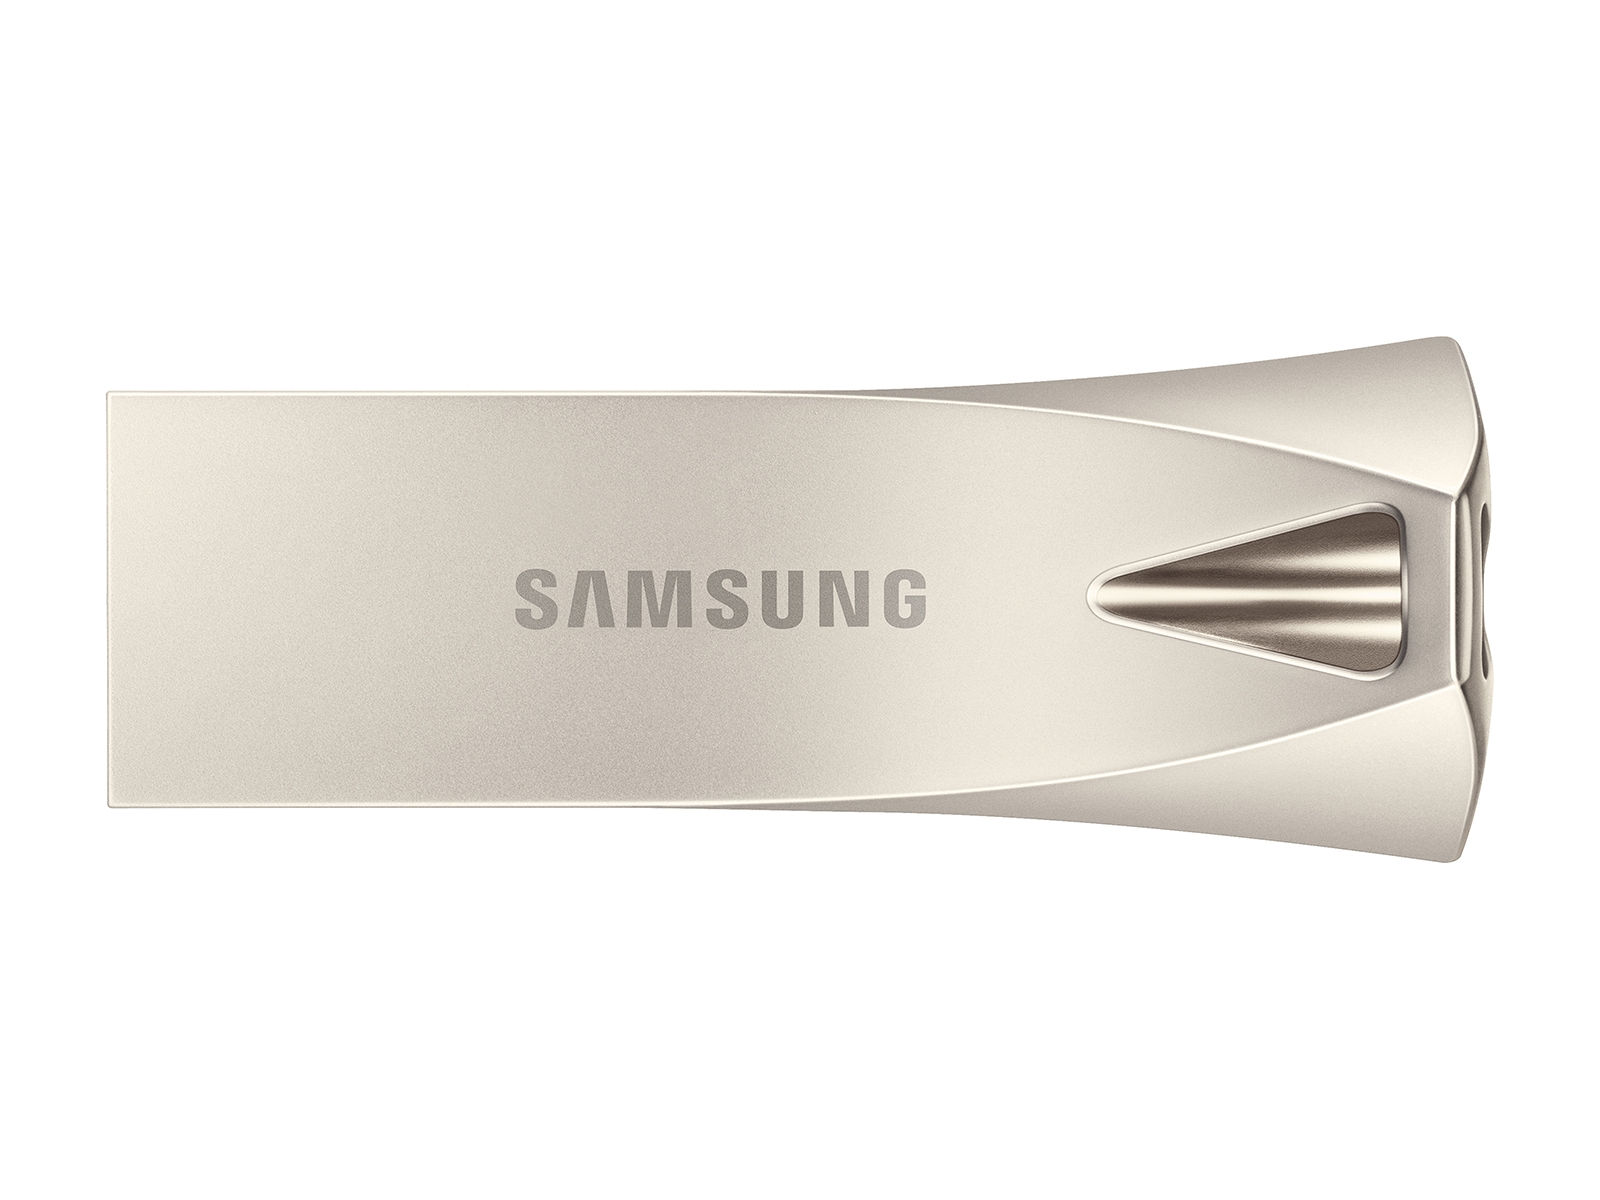 SamsungUS/home/computing/memory-and-storage/usb-flash-drives/pd/muf-64be3/gallery/MUF-64BE3_001_Front_Silver.jpg